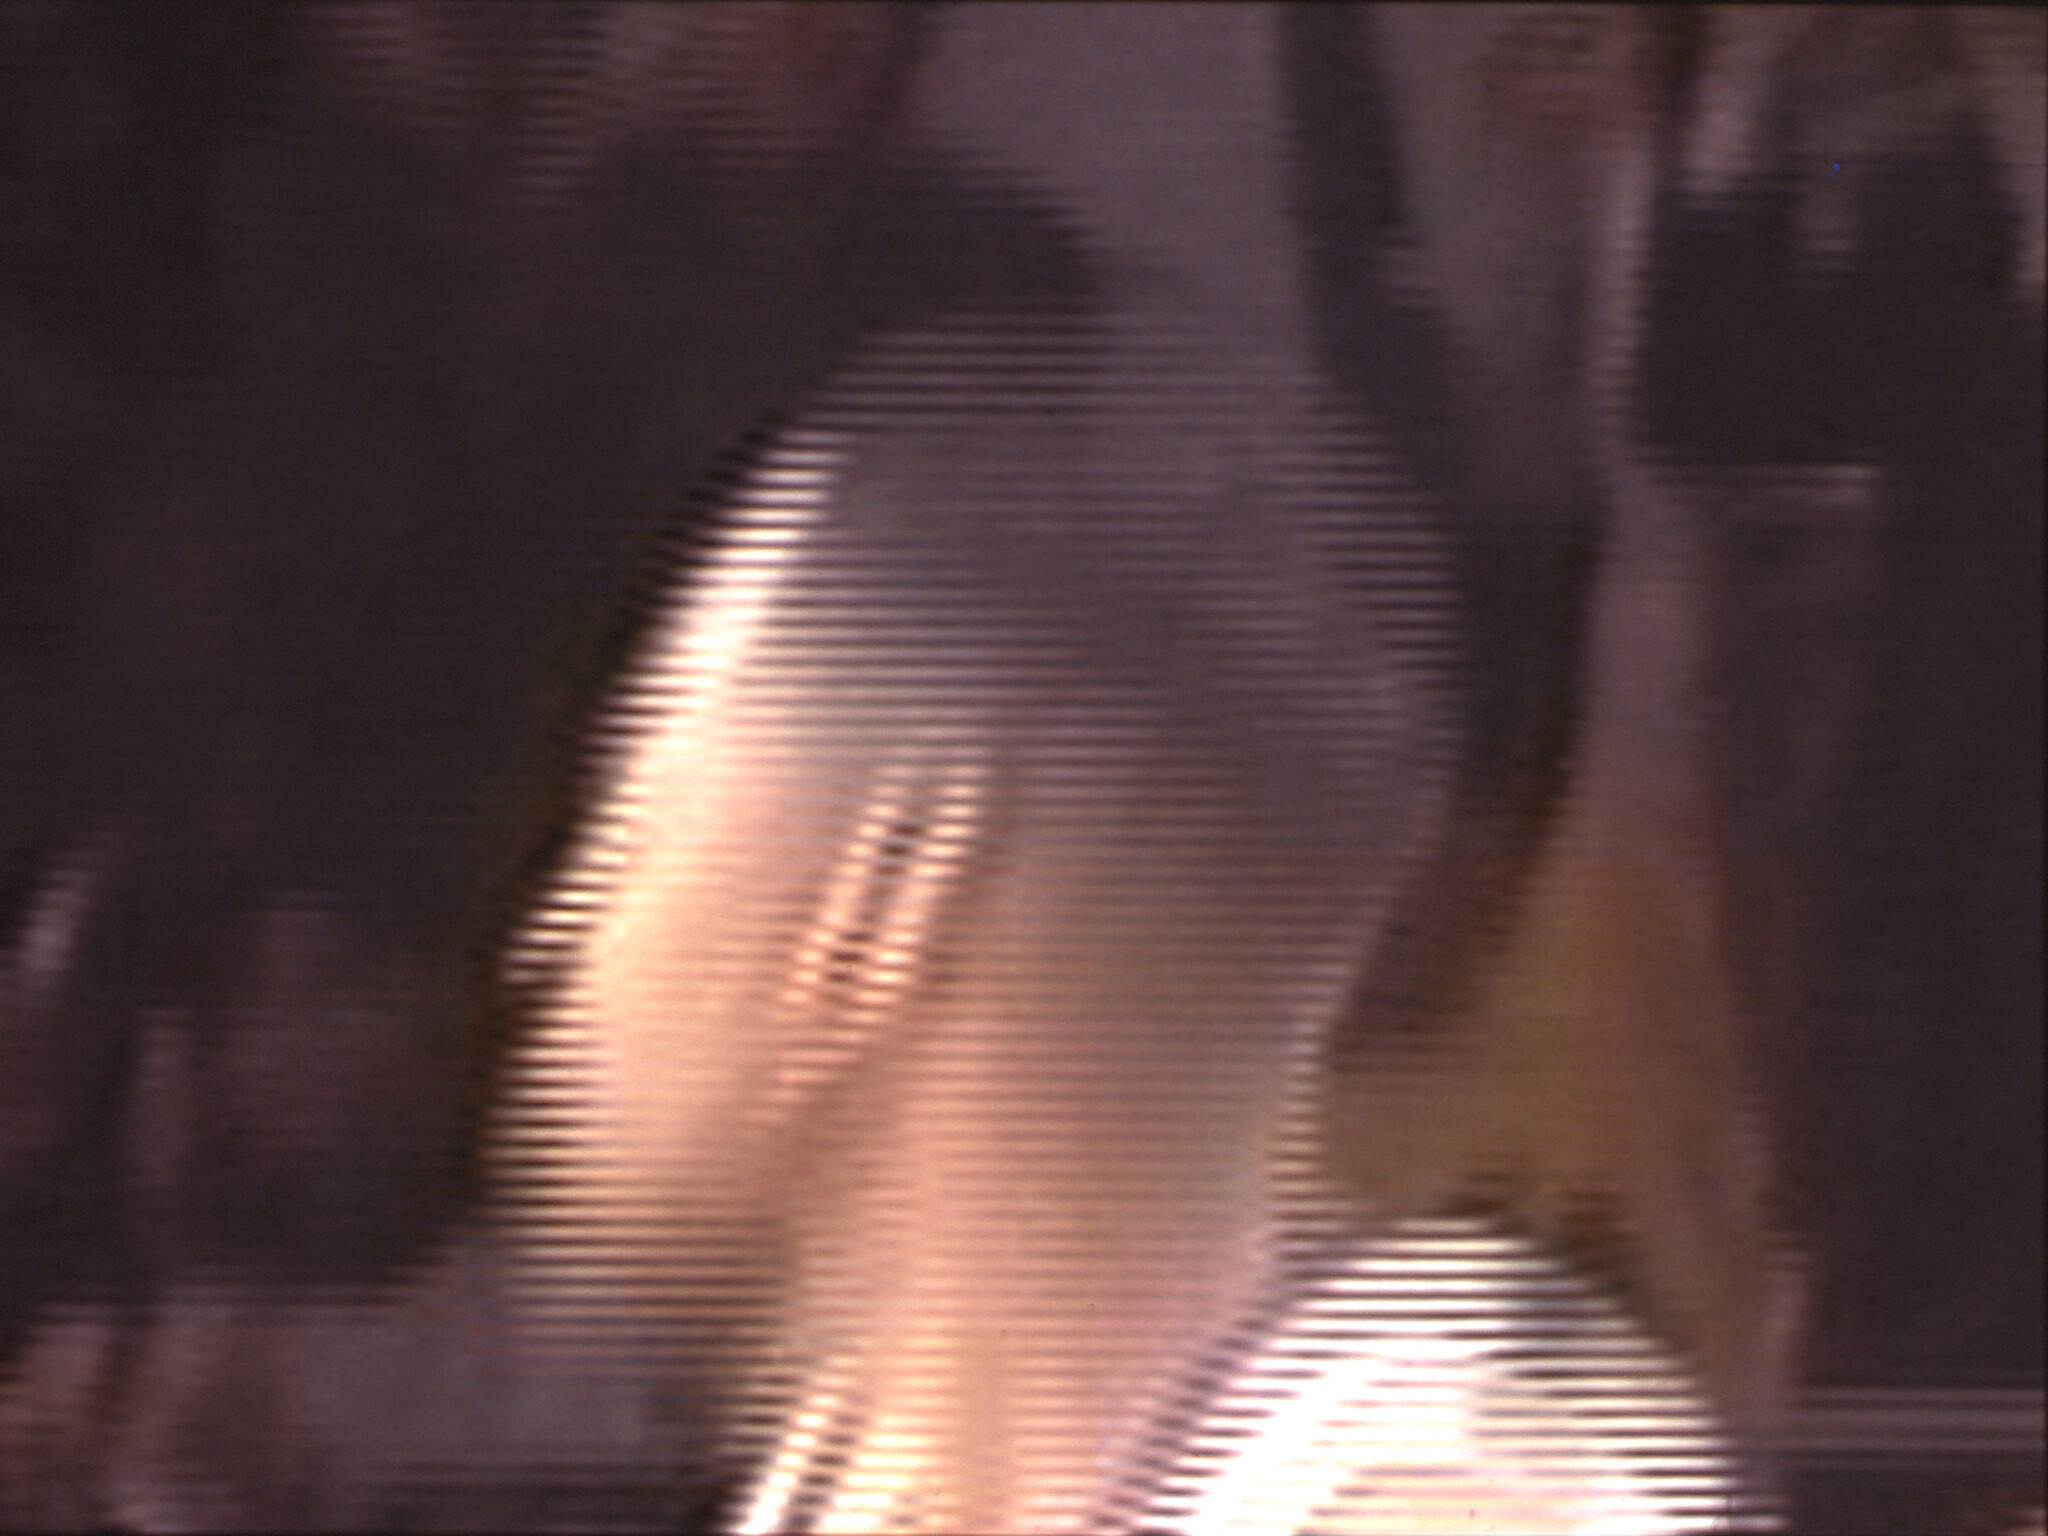 Blurry image of a basketball player.